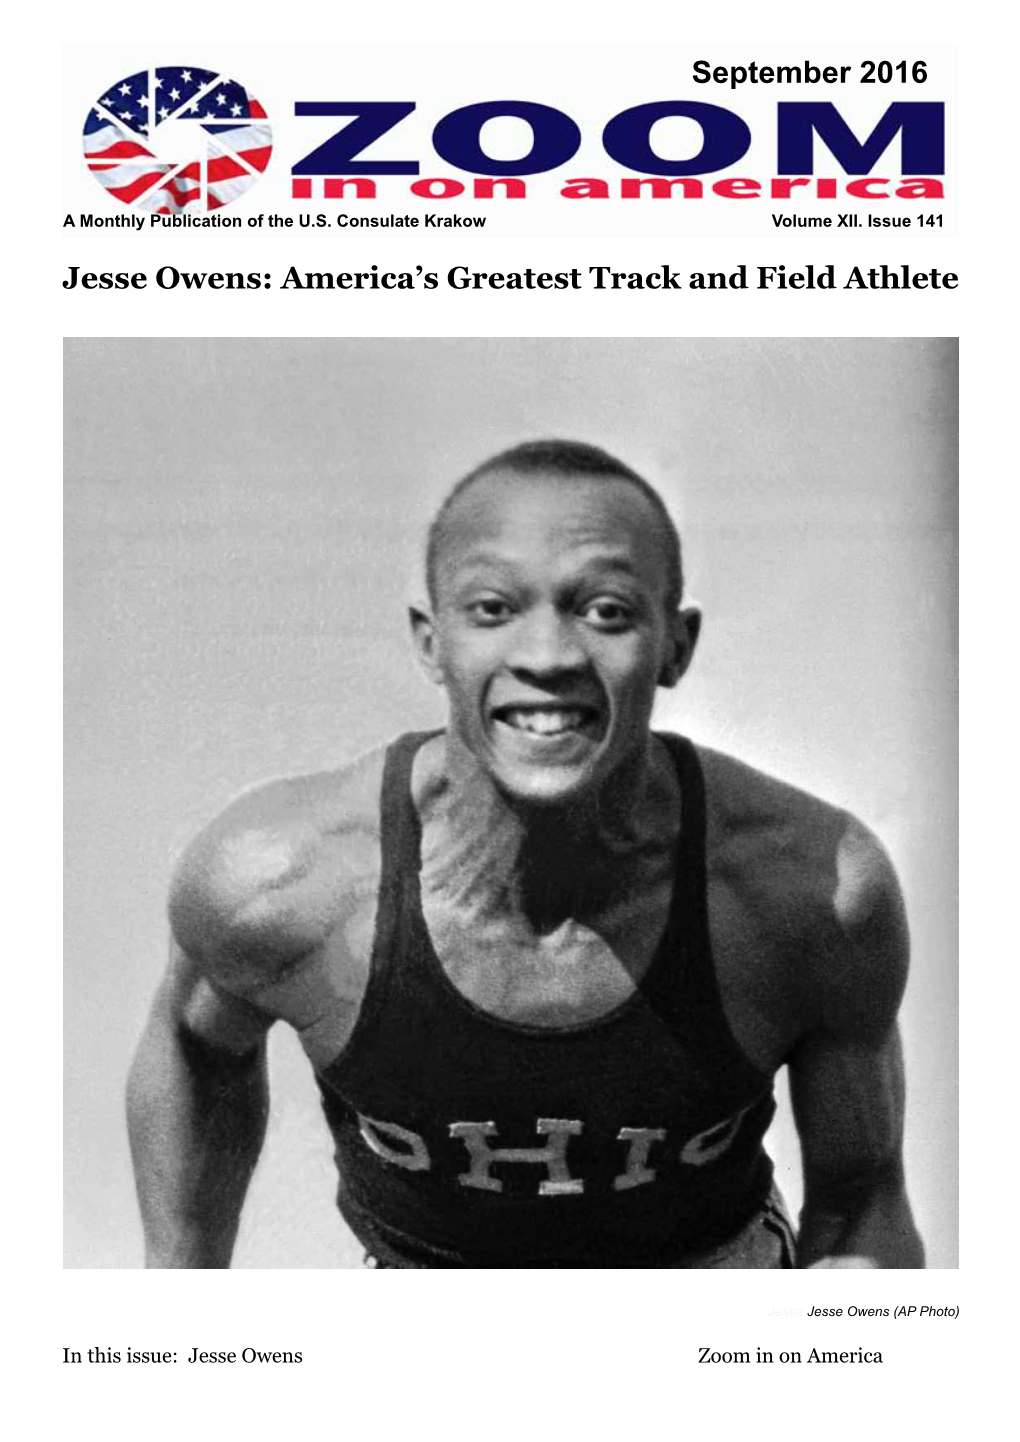 Jesse Owens: America's Greatest Track and Field Athlete